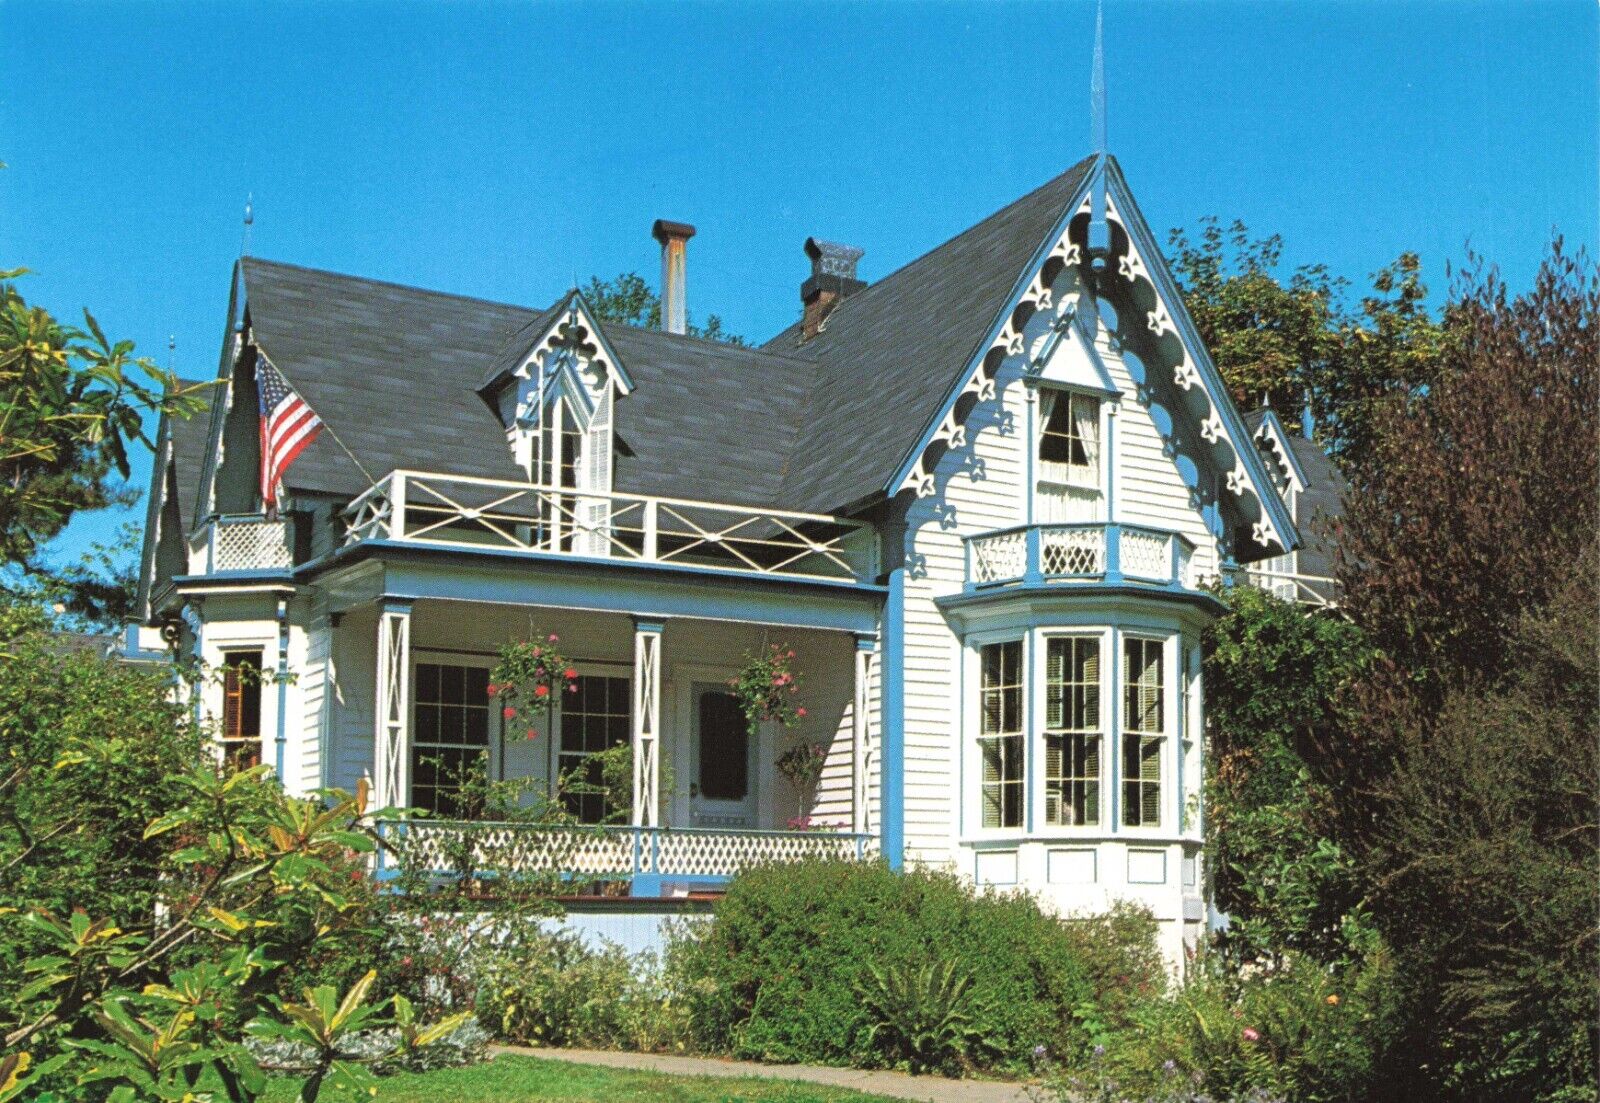 Postcard CA Ferndale Shaw House Bed and Breakfast Gothic Victorian Architecture